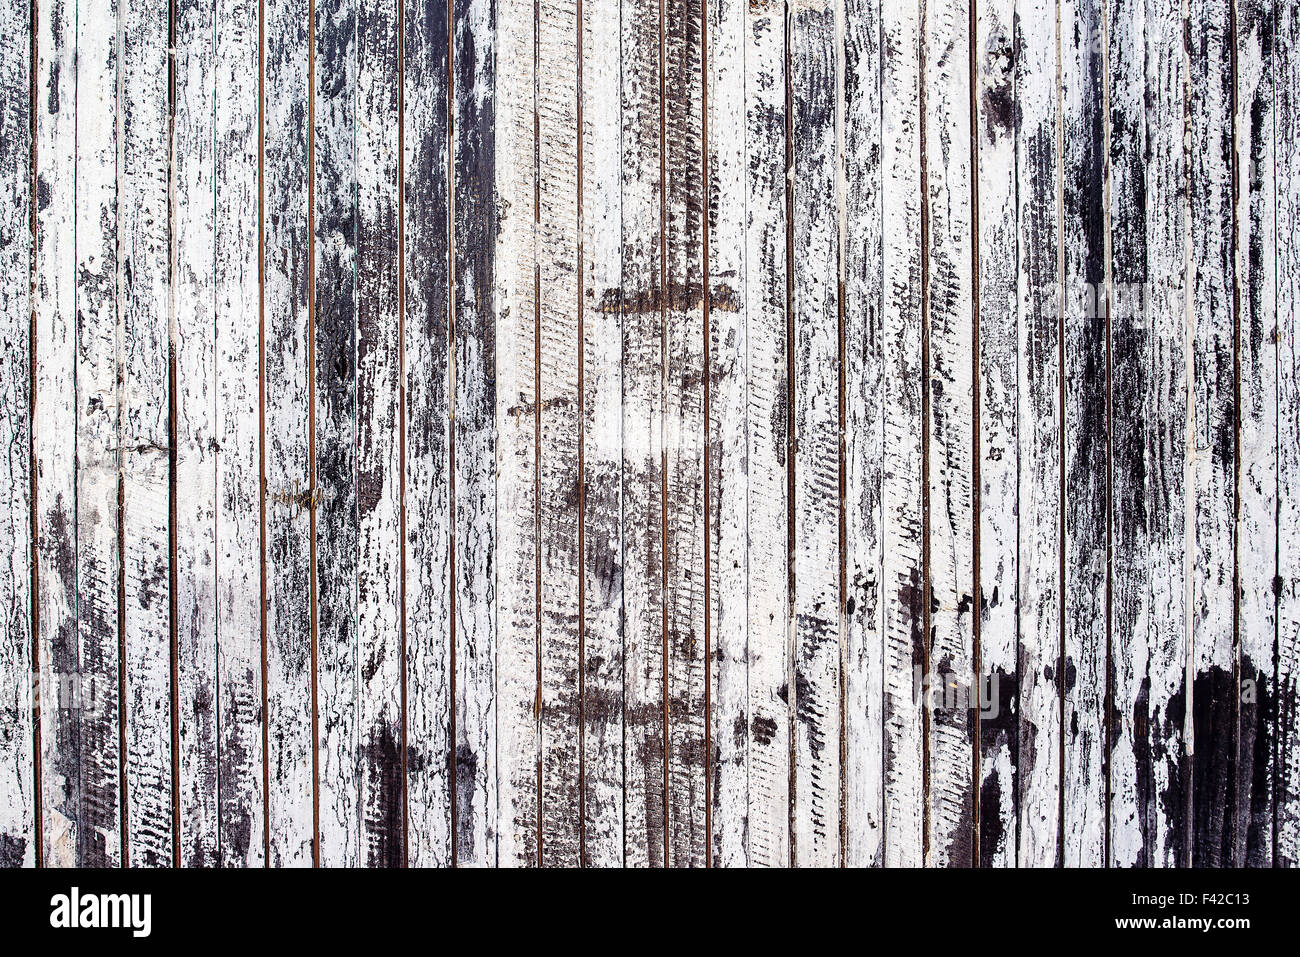 Old rustic wooden plank wall painted white, paint peel texture Stock Photo